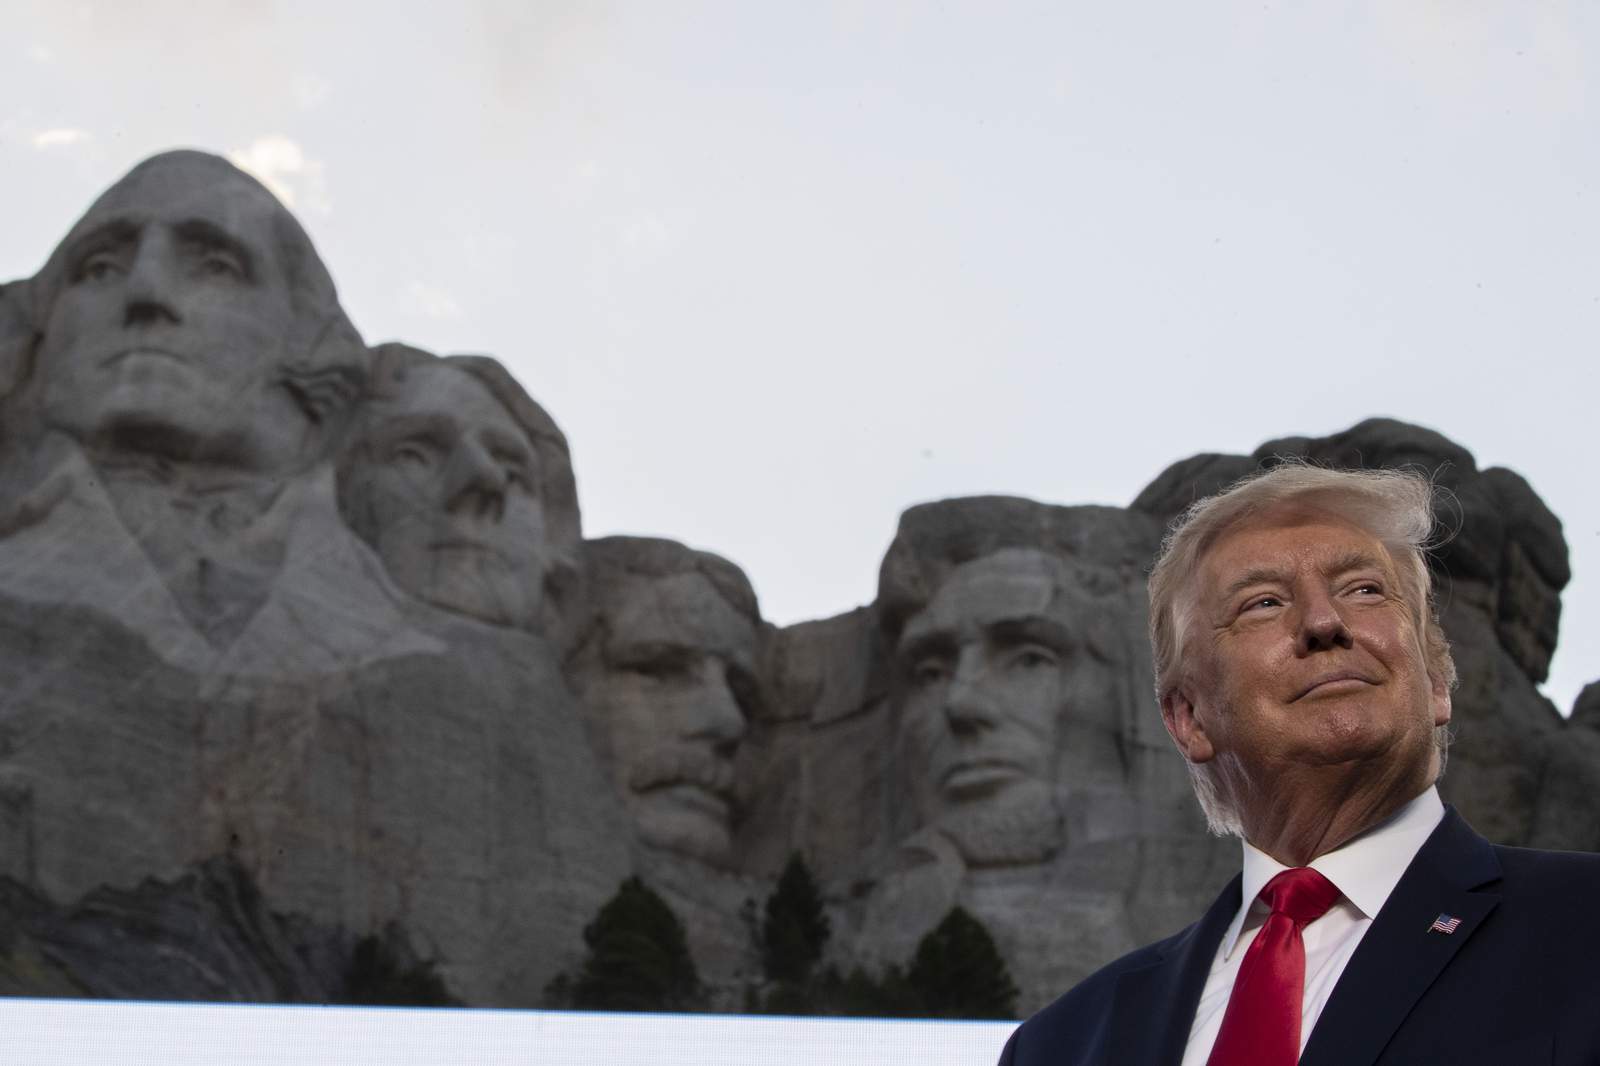 President Trump on Mount Rushmore? President denies suggesting it, but says it’s a ‘good idea'